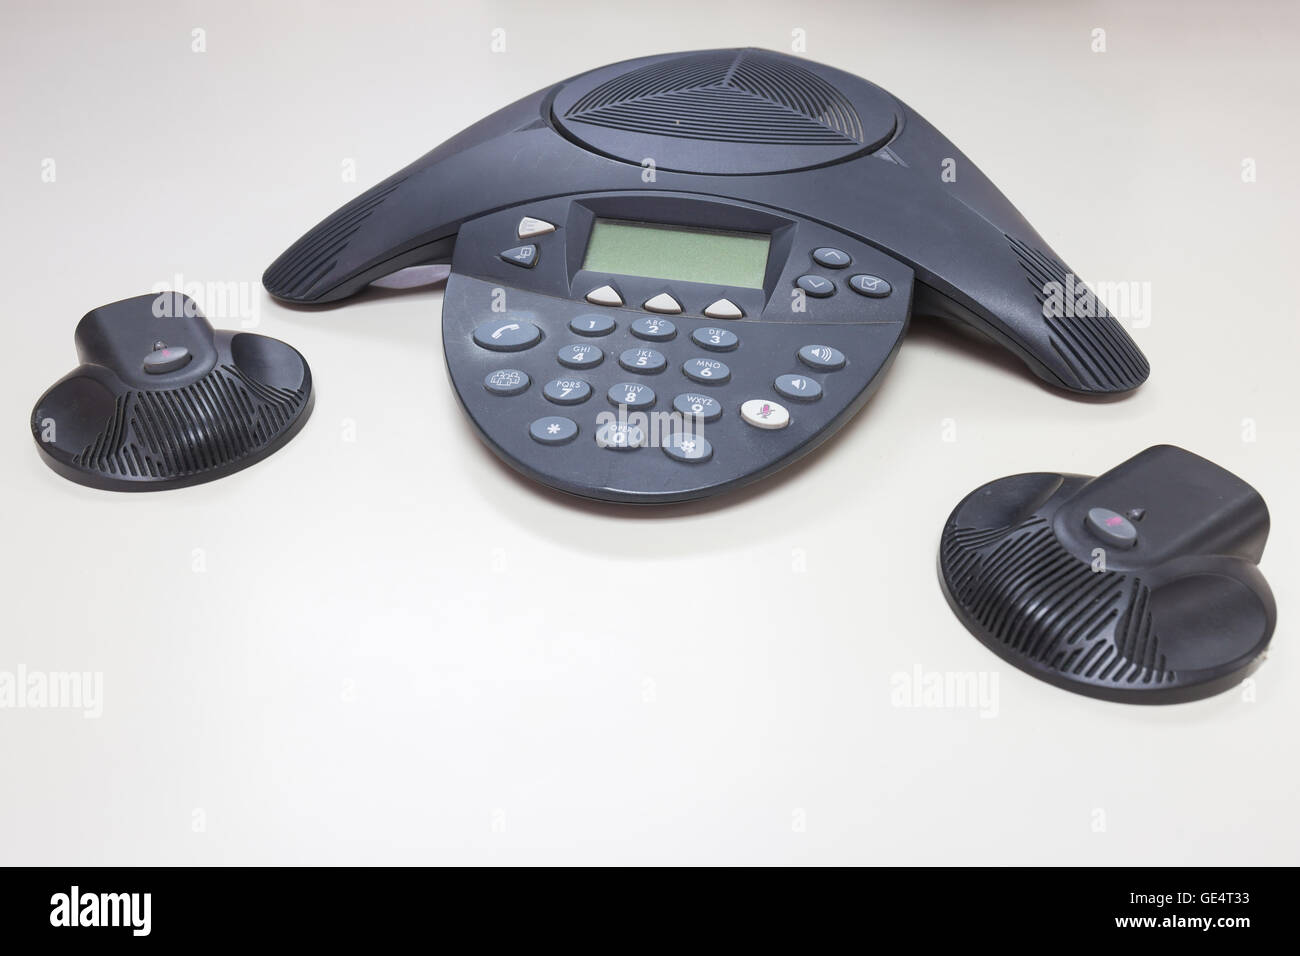 Conference IP phone on white table background Stock Photo